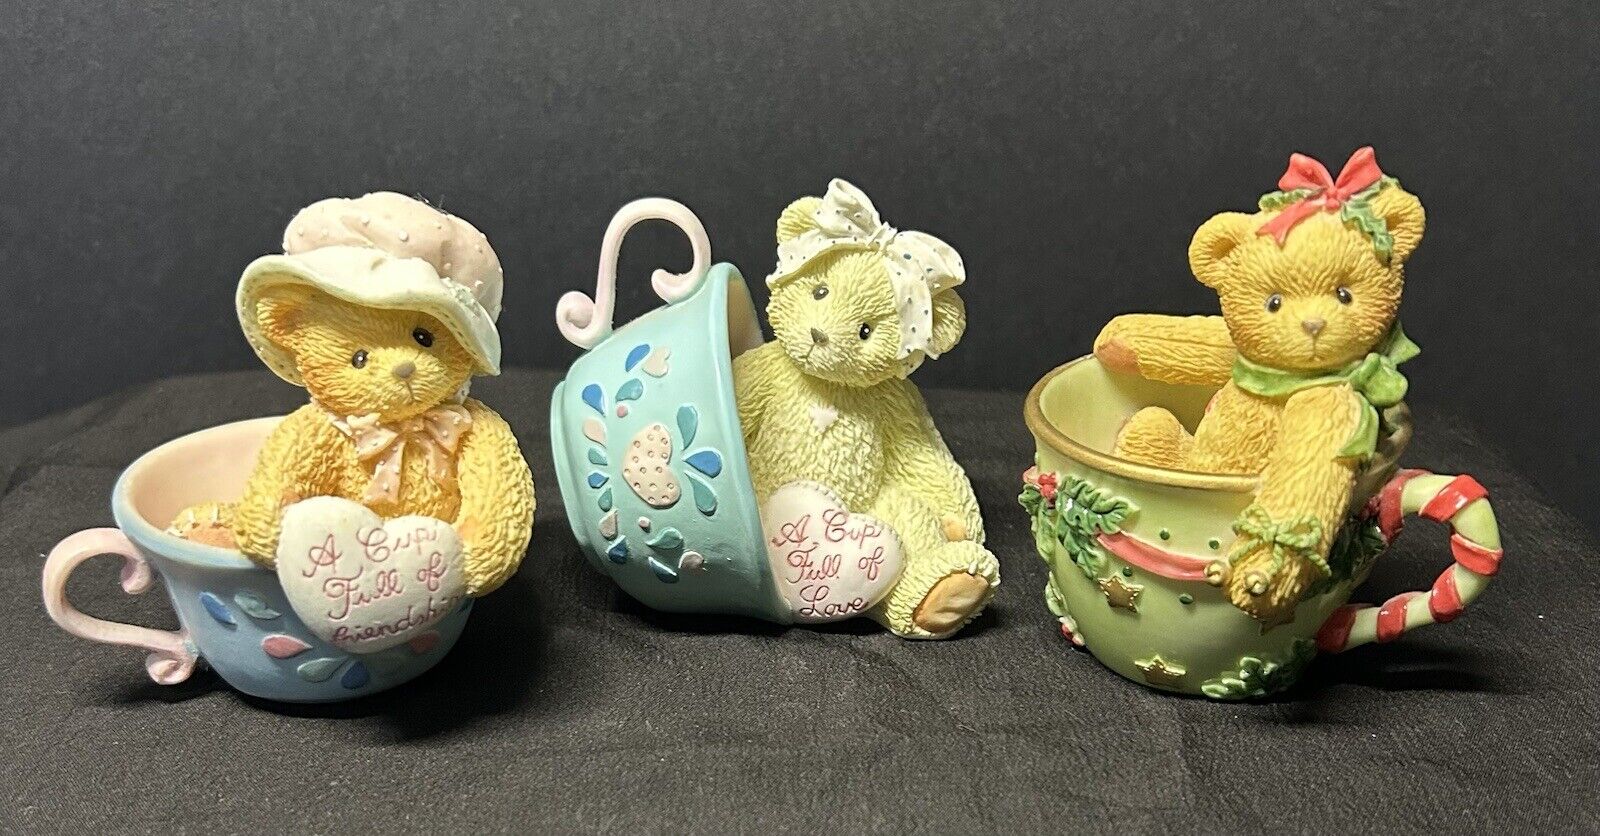 Cherished Teddies 3 Teacup Bears Cup Of Love, Cup Of Friendship & Christmas